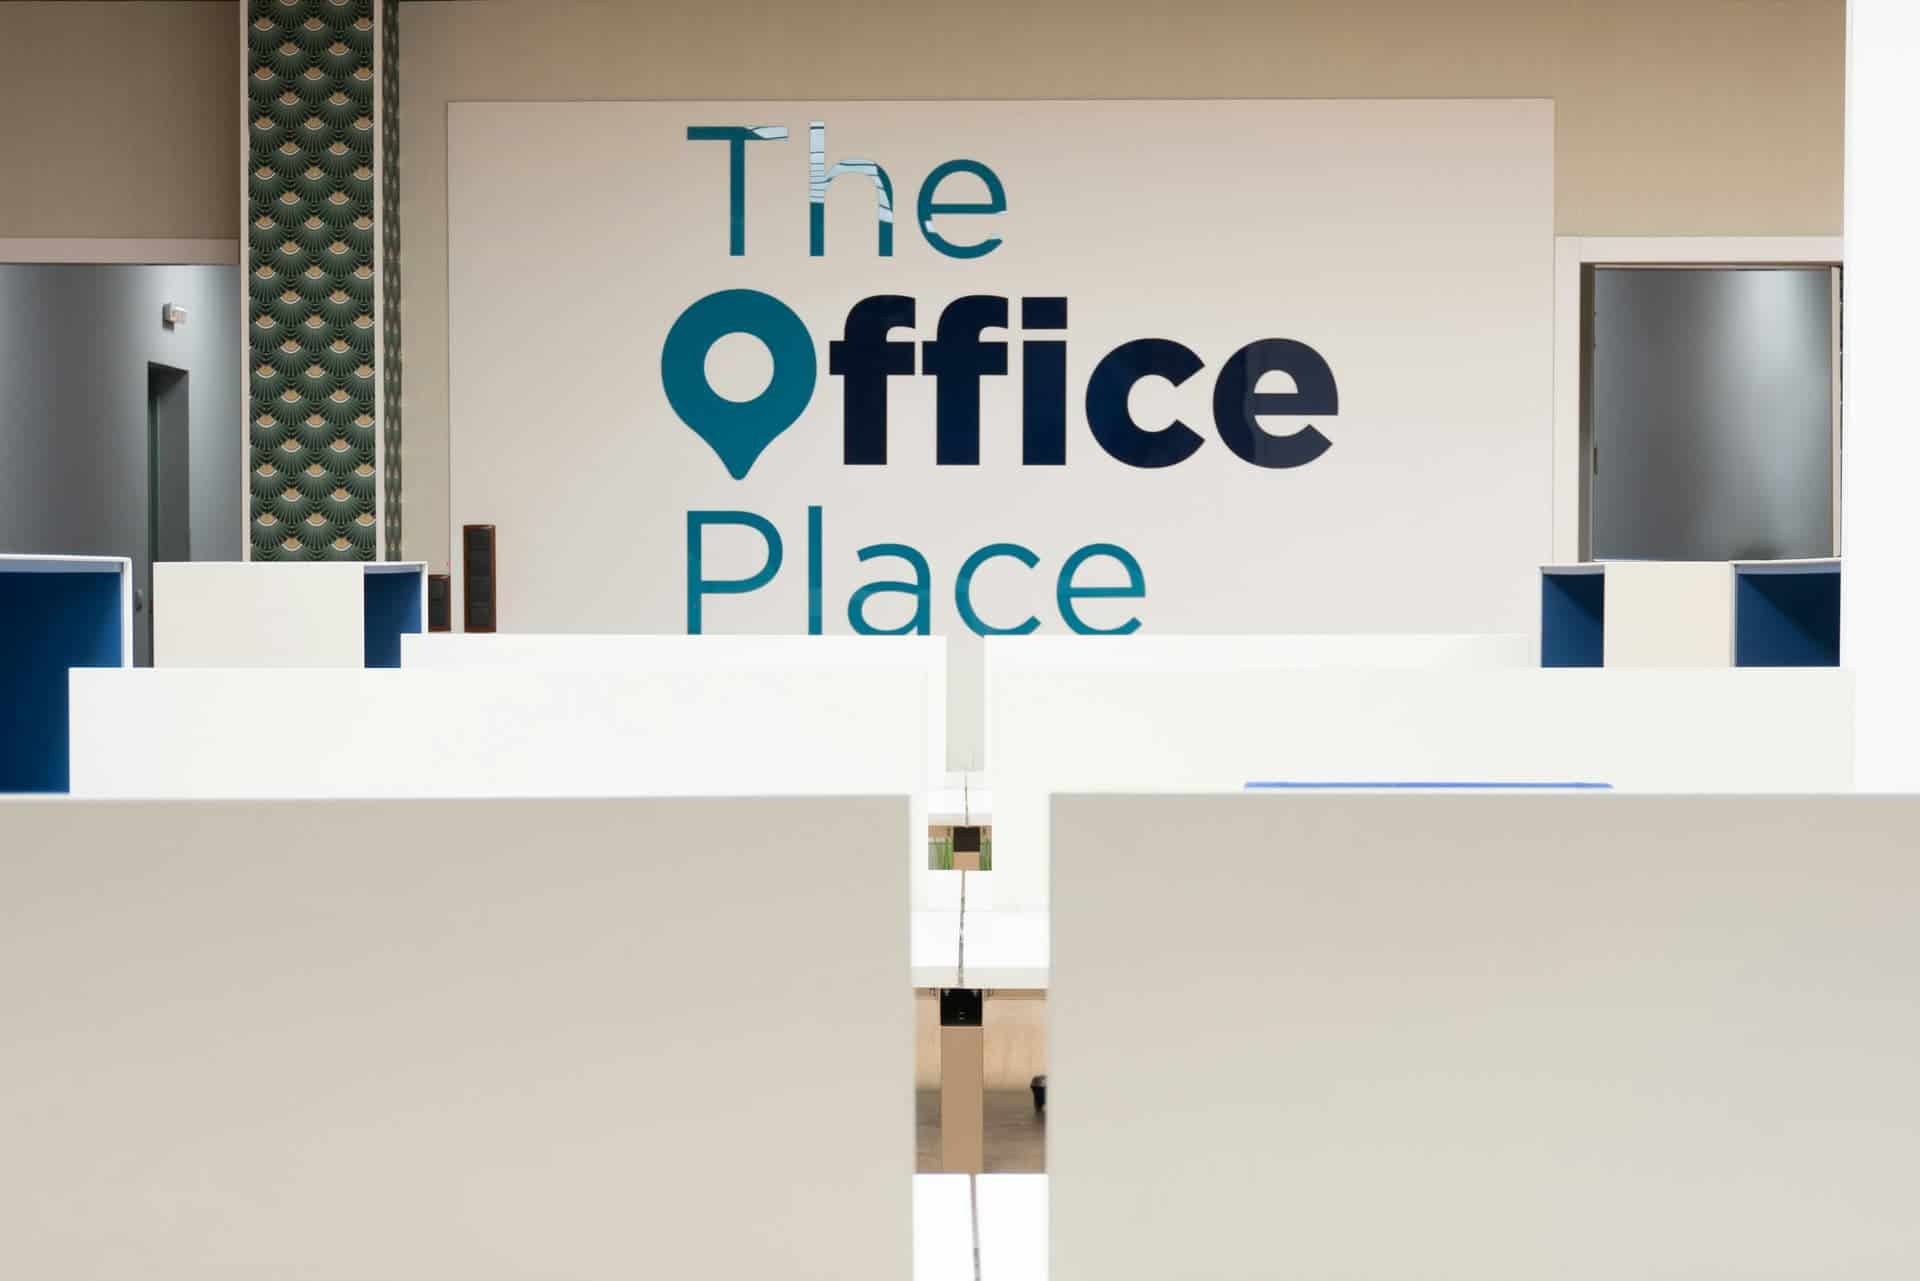 The Office Place